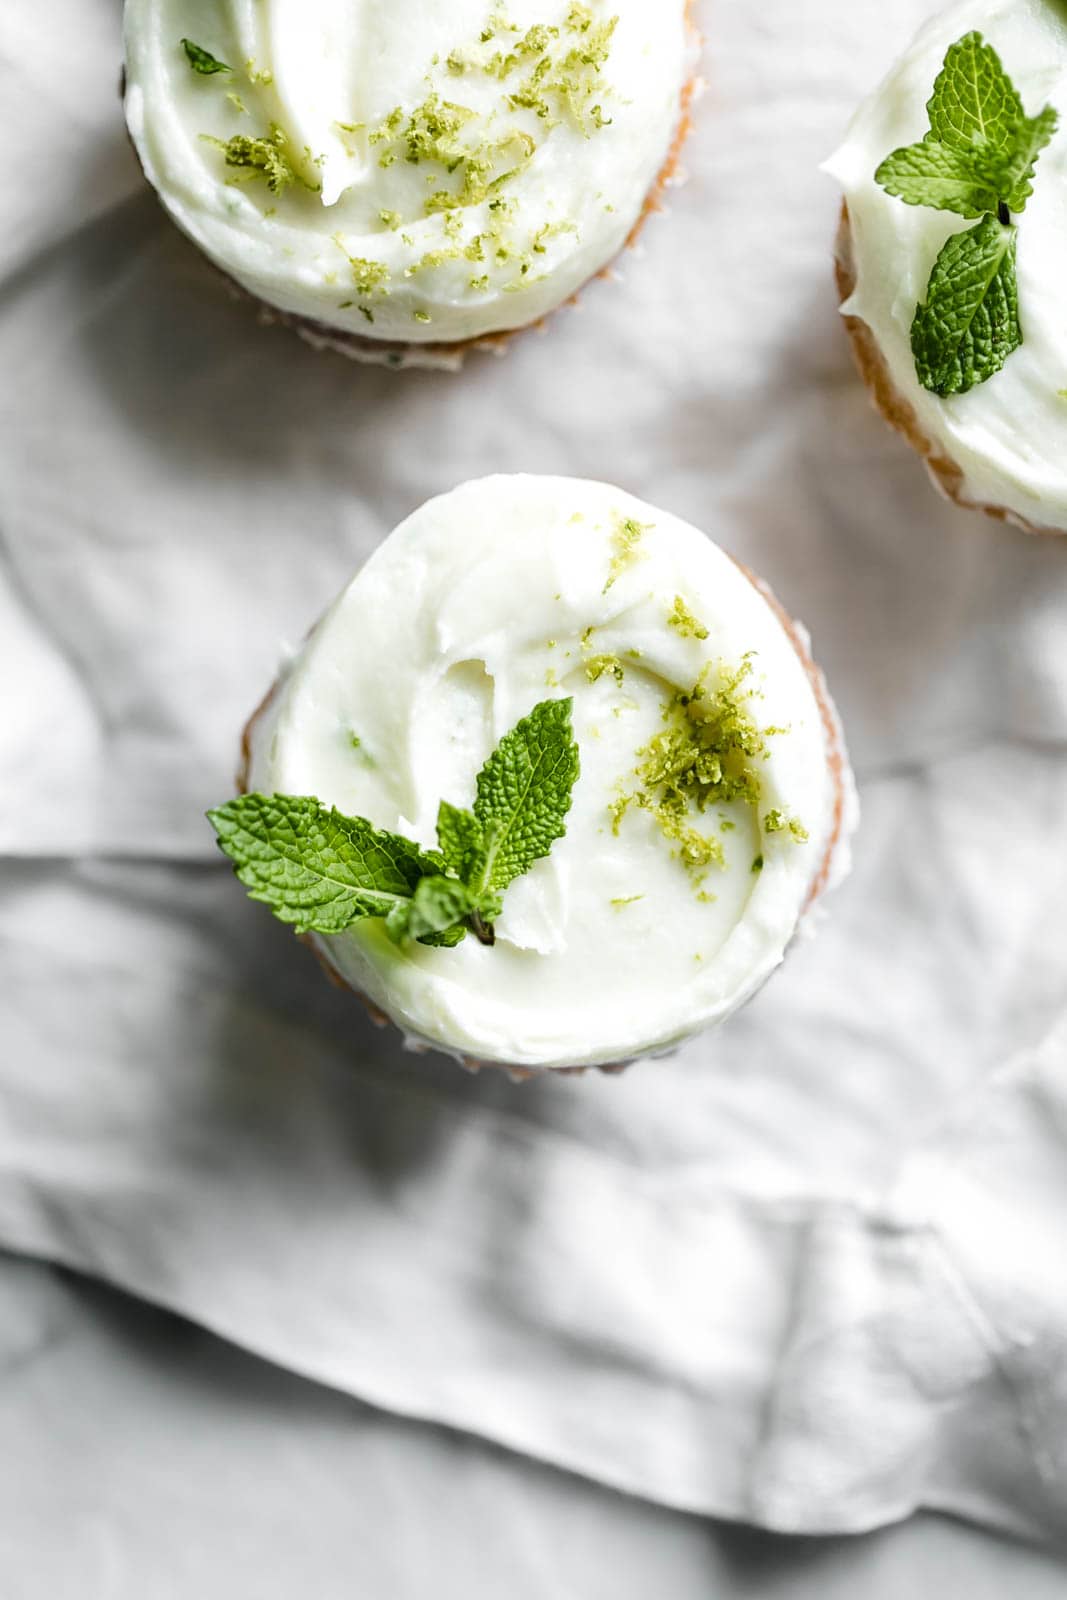 What could be better than boozy Lemon Mojito Cupcakes with a cream cheese frosting, mint, and lime zest? The answer is nothing, friends. Nothing.